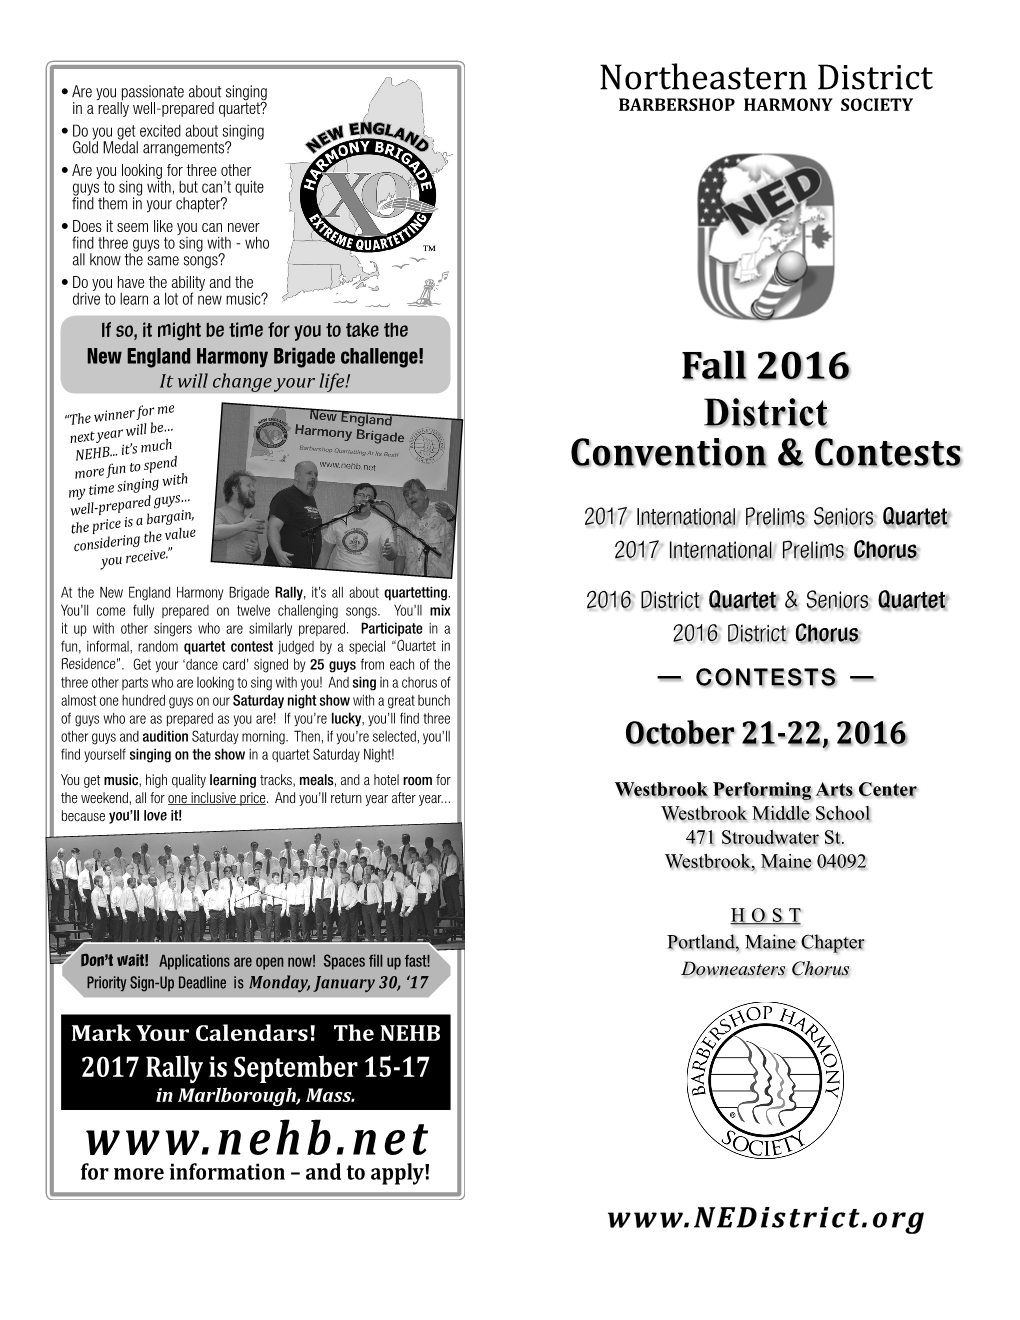 Fall 2016 District Convention & Contests